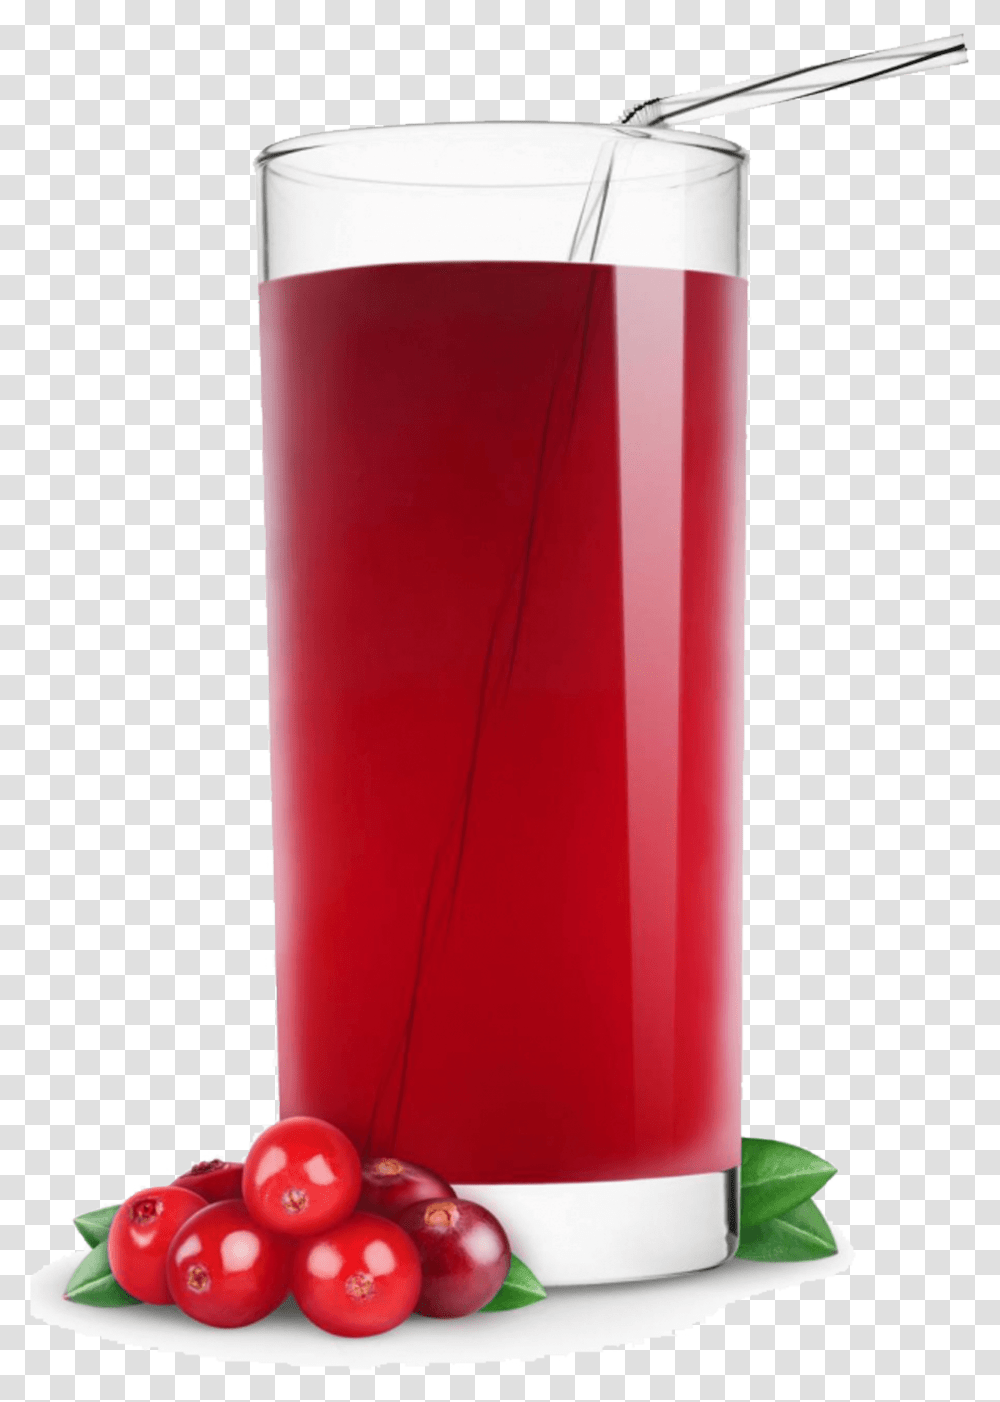 Honeymoon Cystitis Is A Condition In Which A Woman Orange Apple Cranberry Juice, Bottle, Beverage, Drink, Cylinder Transparent Png